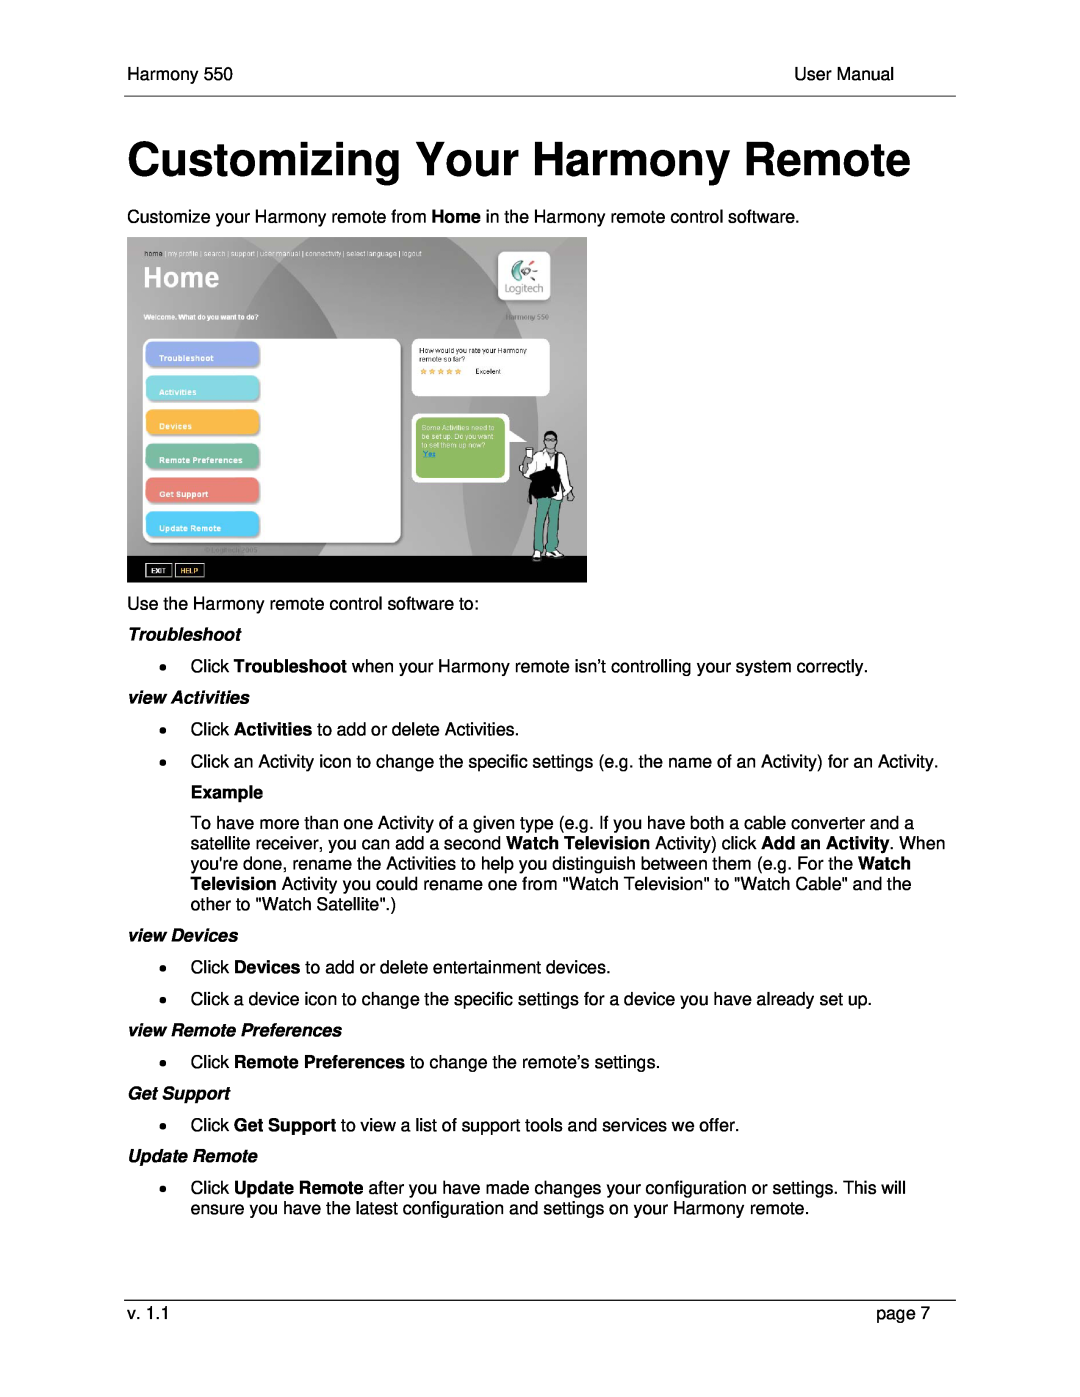 Logitech 550 user manual Customizing Your Harmony Remote, Troubleshoot, view Devices, Get Support, Update Remote, Example 